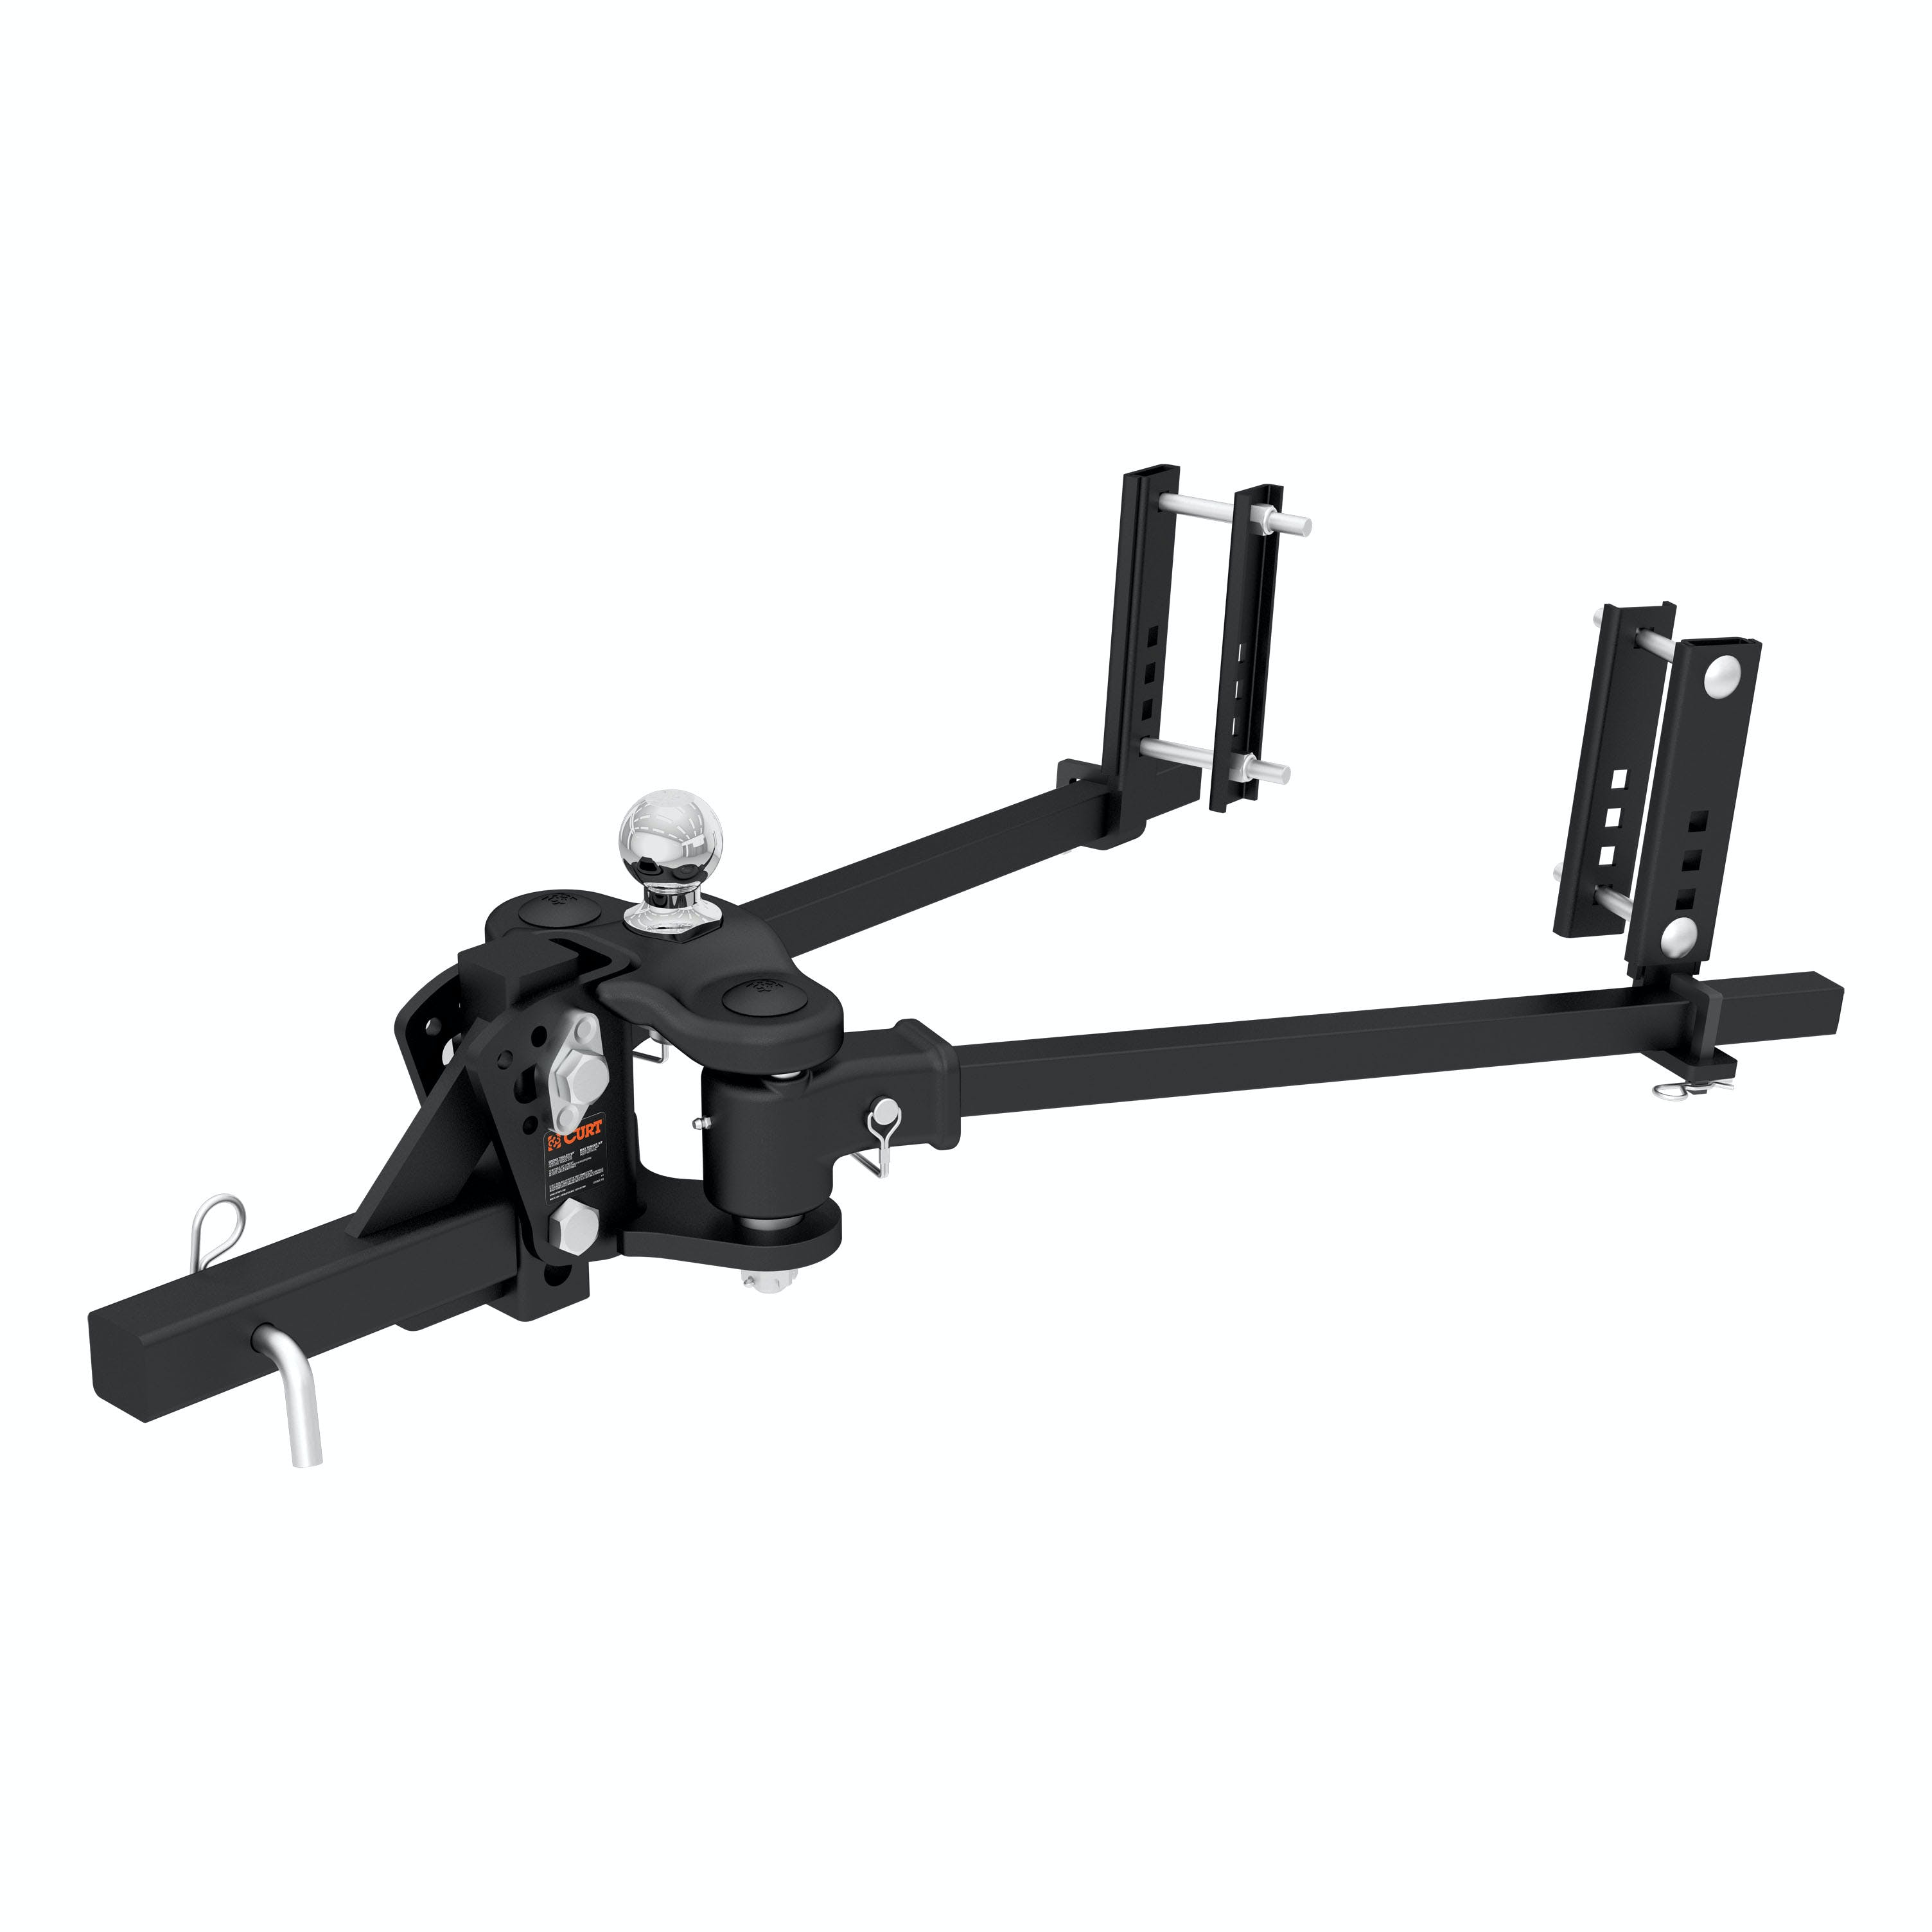 CURT 17500 TruTrack Weight Distribution Hitch with Sway Control (8-10K, 35-9/16 Bars)